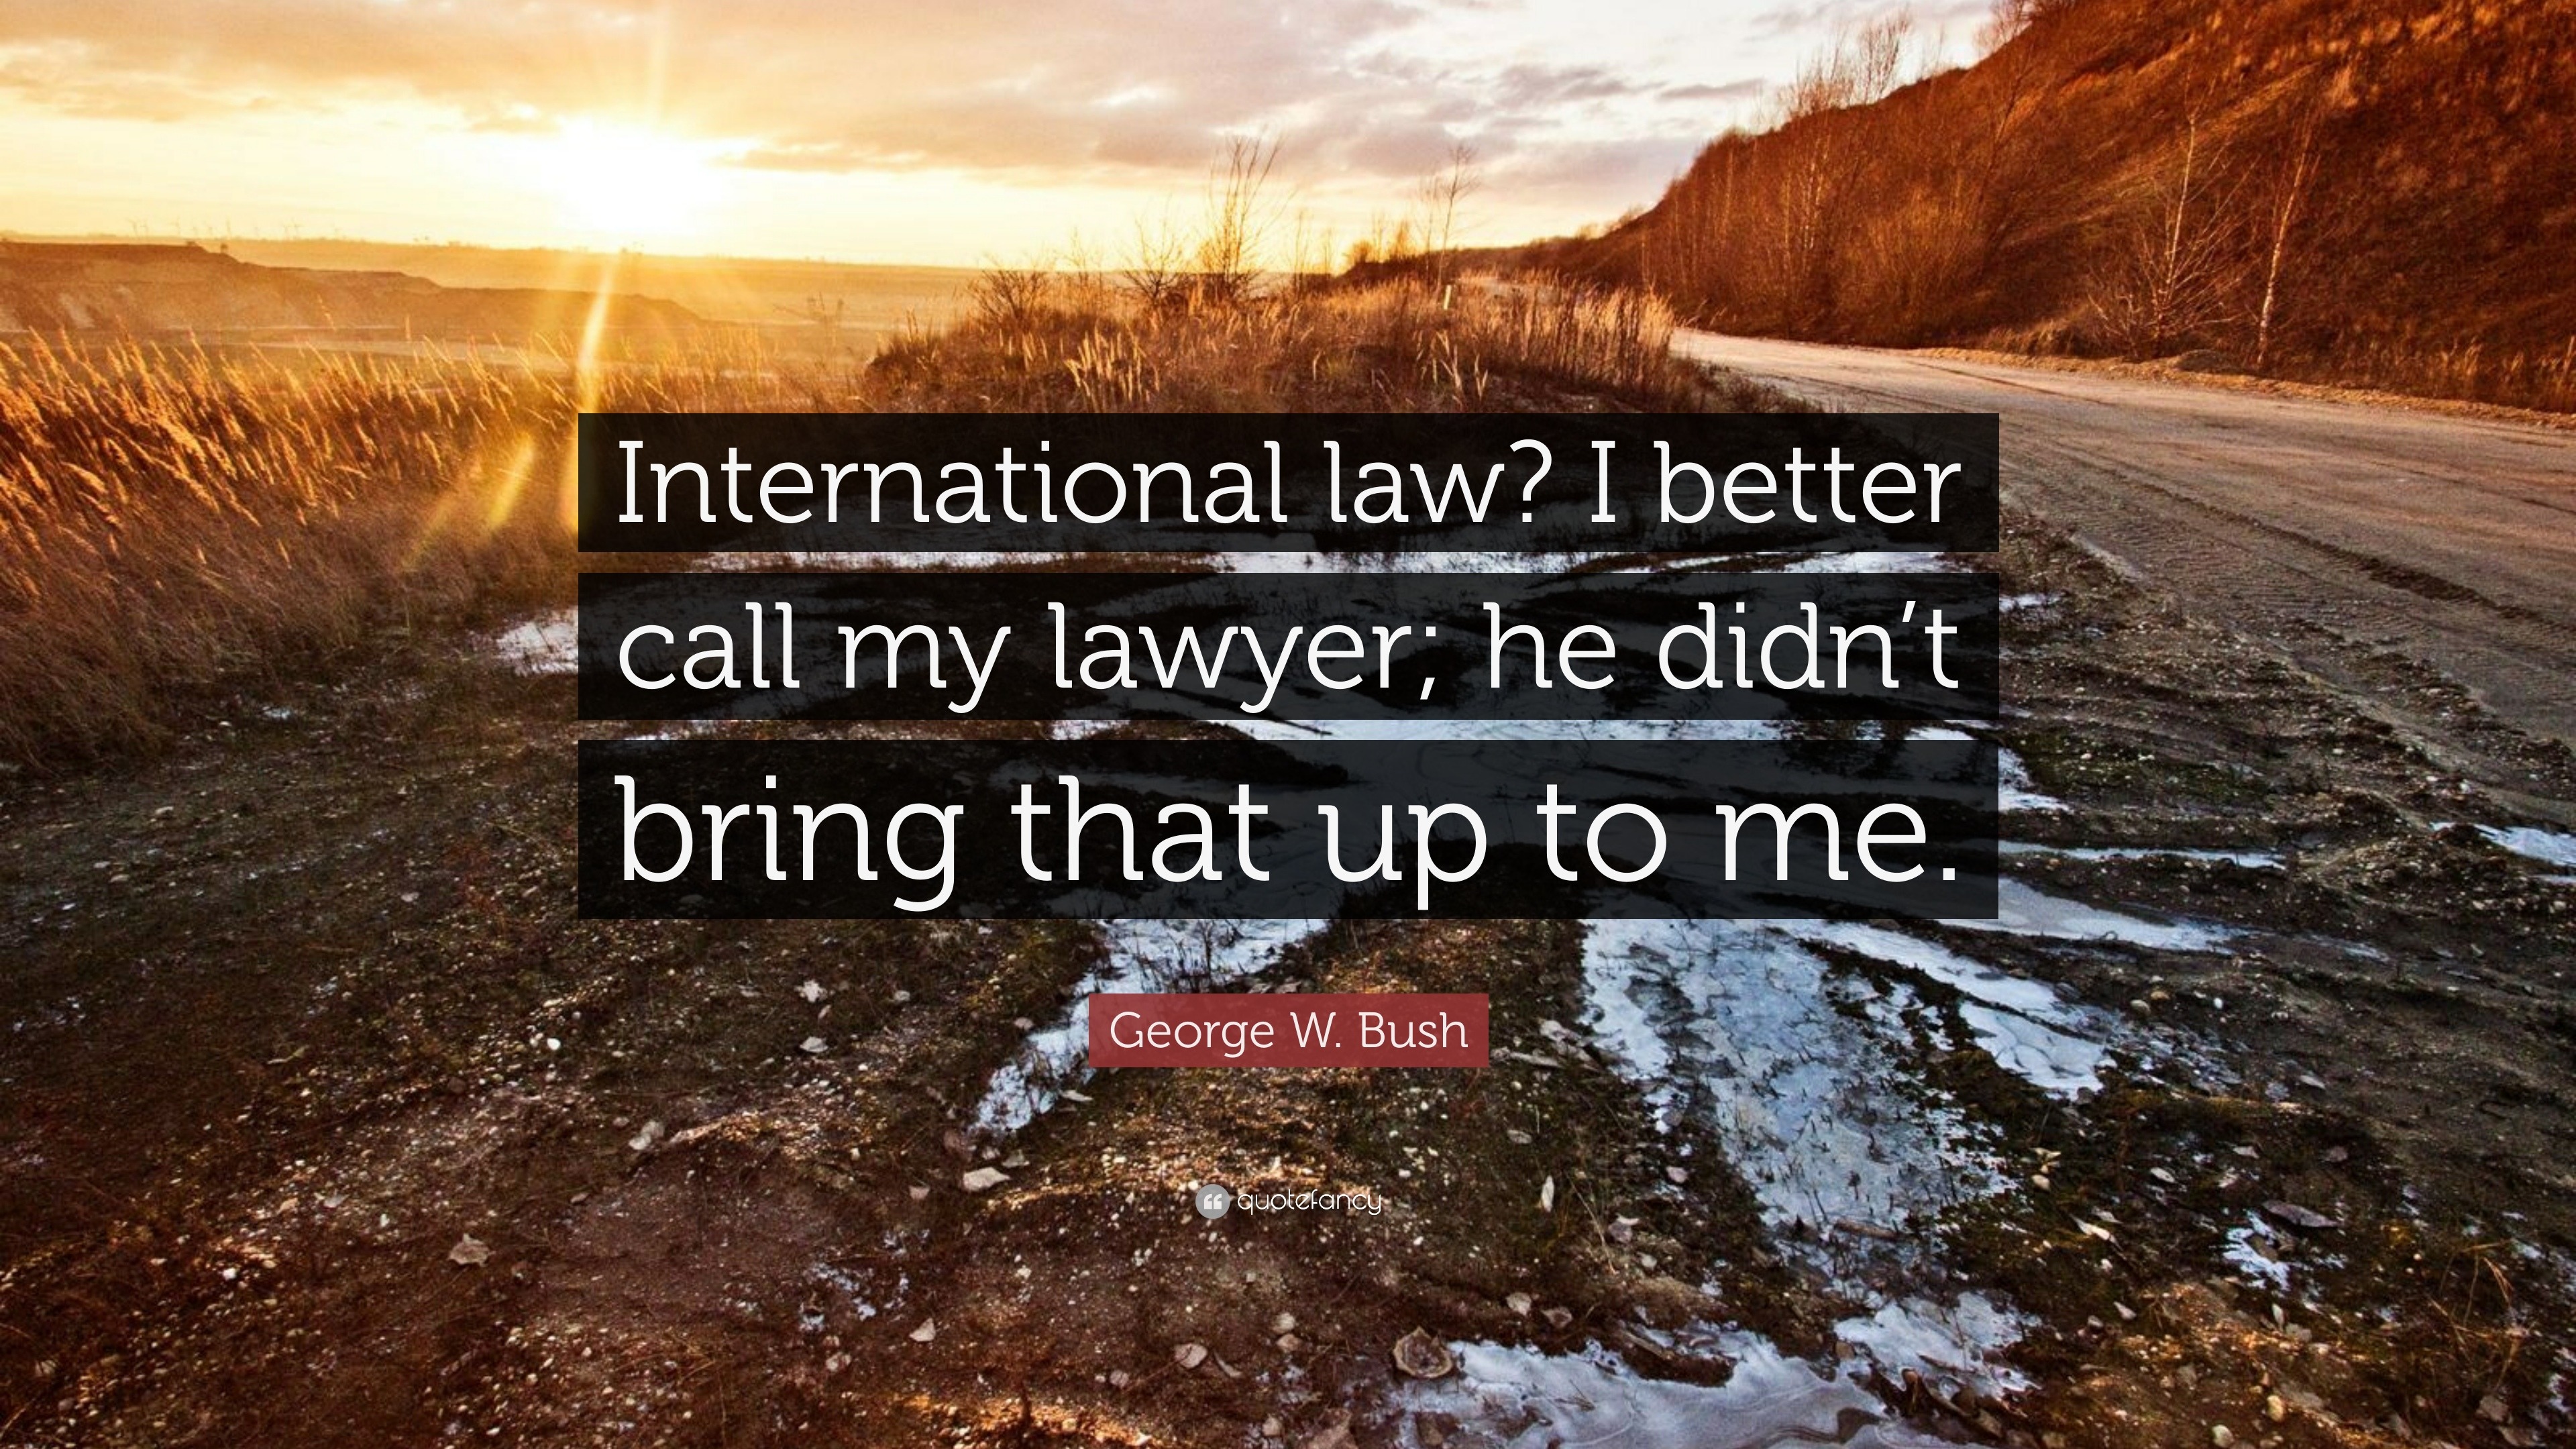 George W. Bush Quote: “International law? I better call my lawyer; he